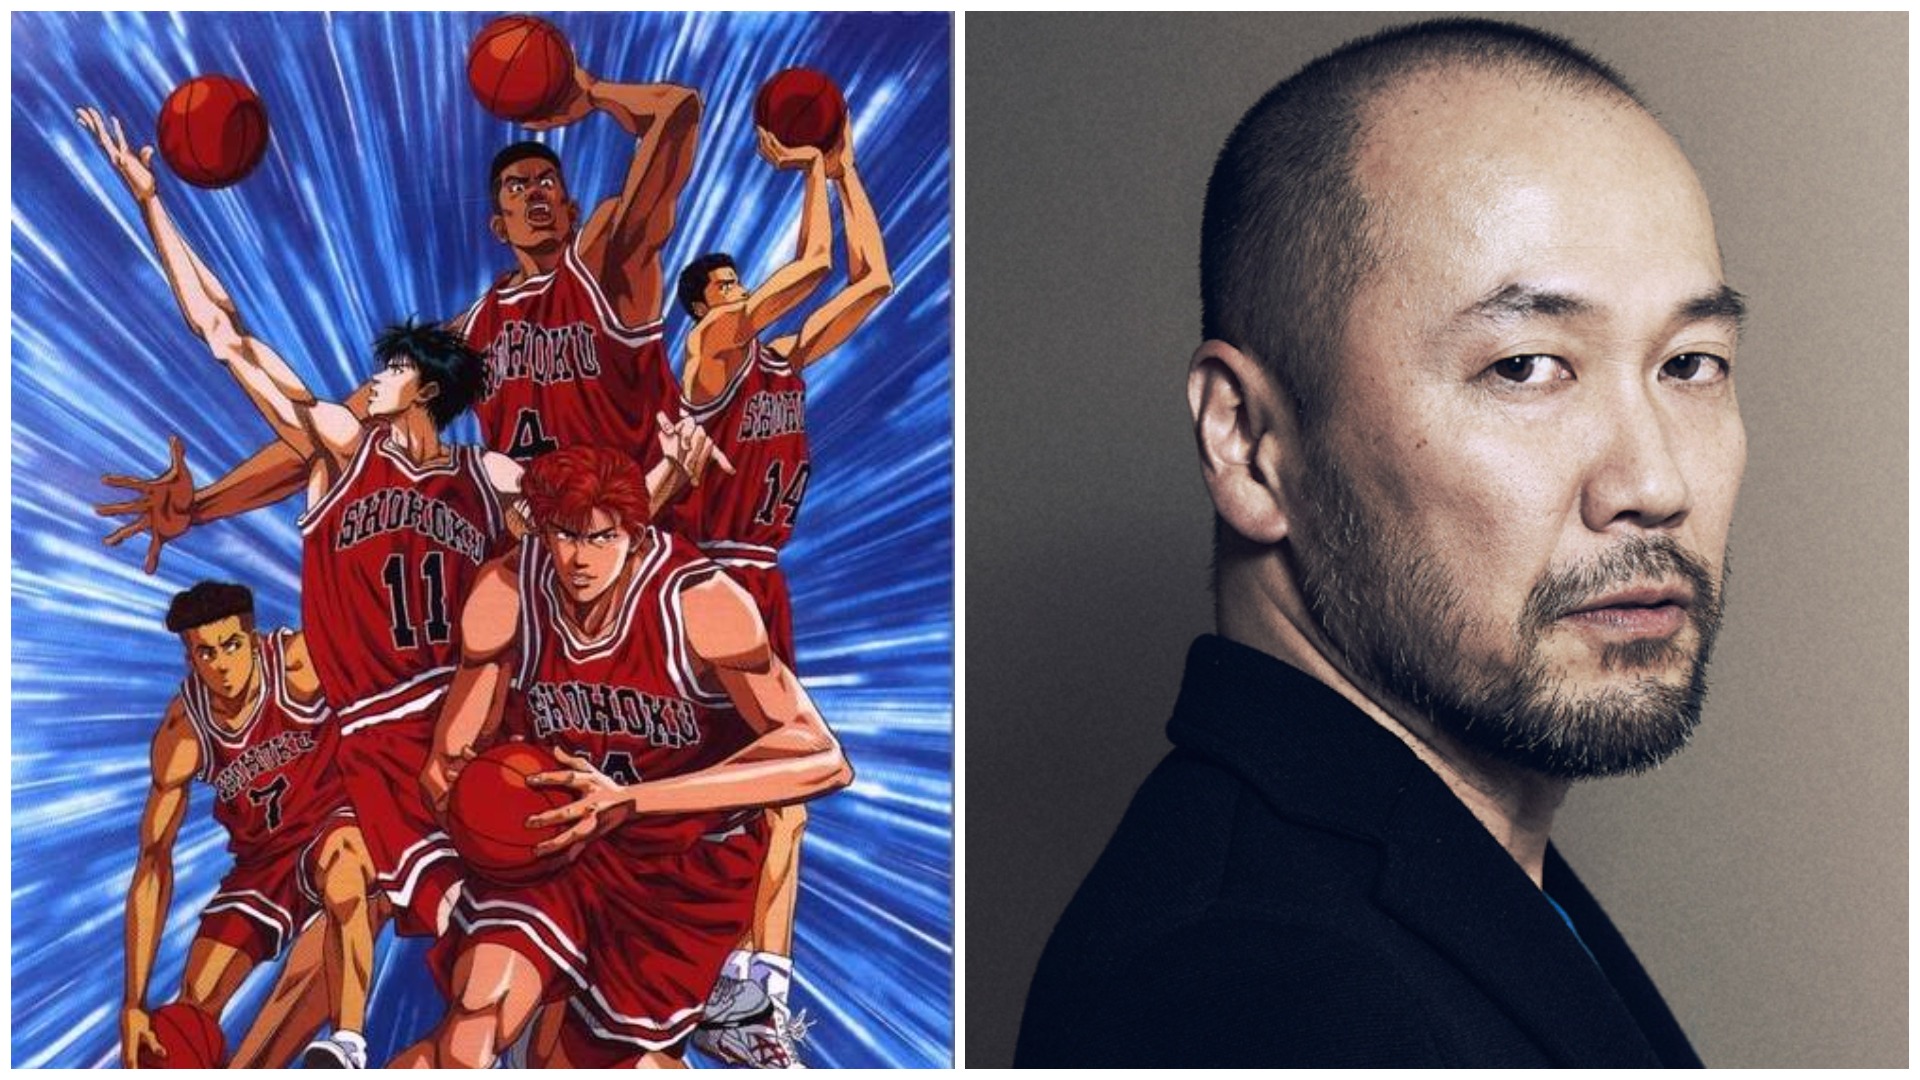 New Slam Dunk Movie Set To Be Released